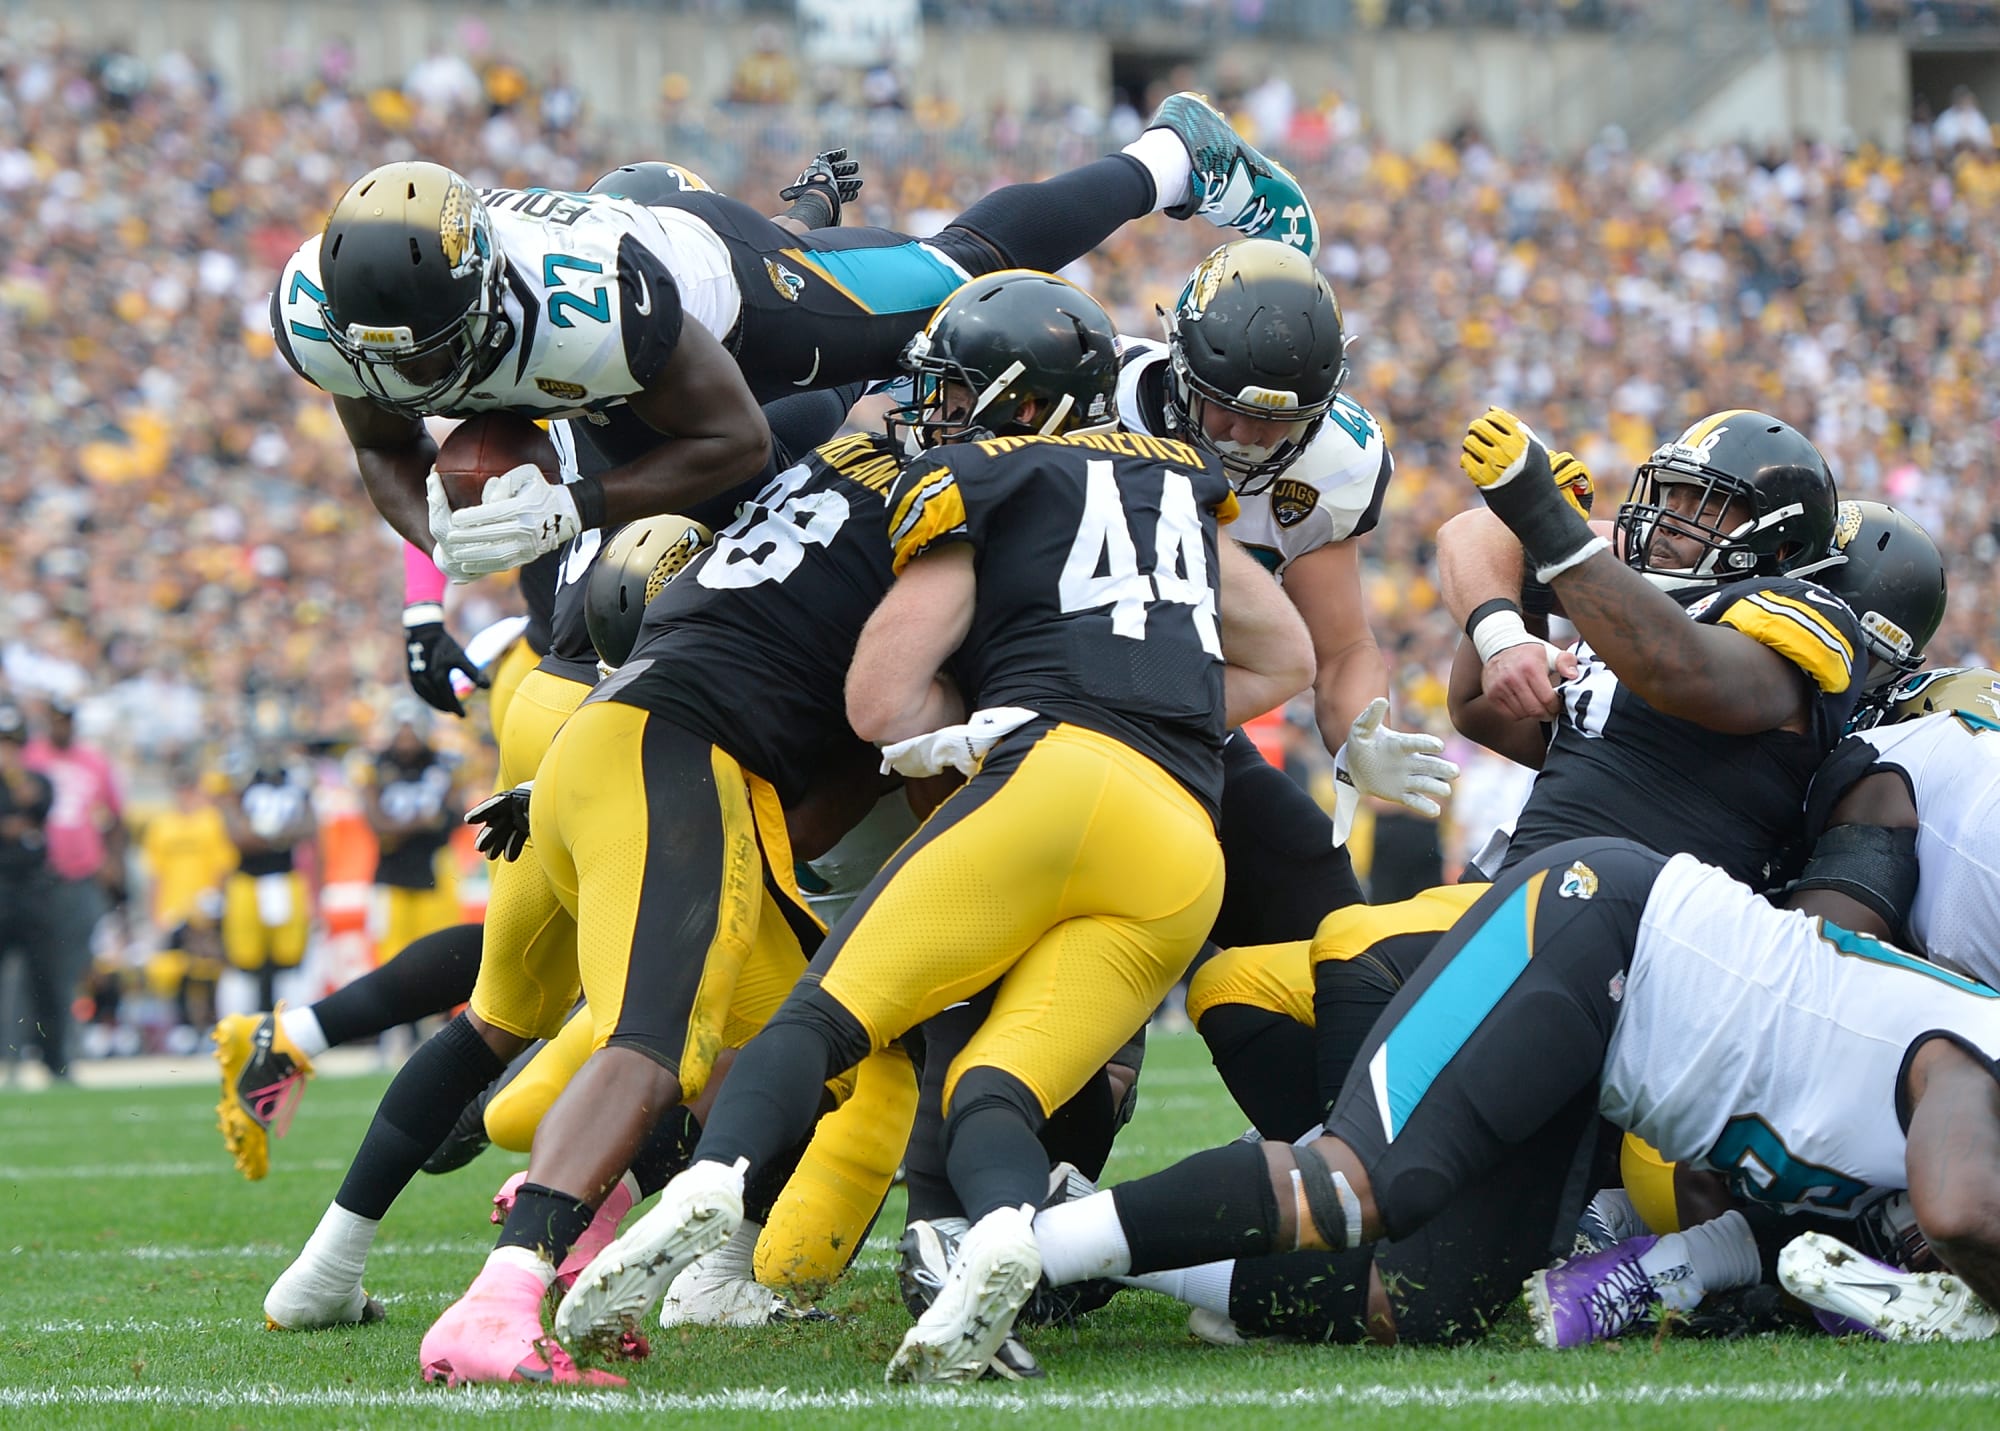 Jaguars vs. Steelers Preview, score prediction for Divisional Round